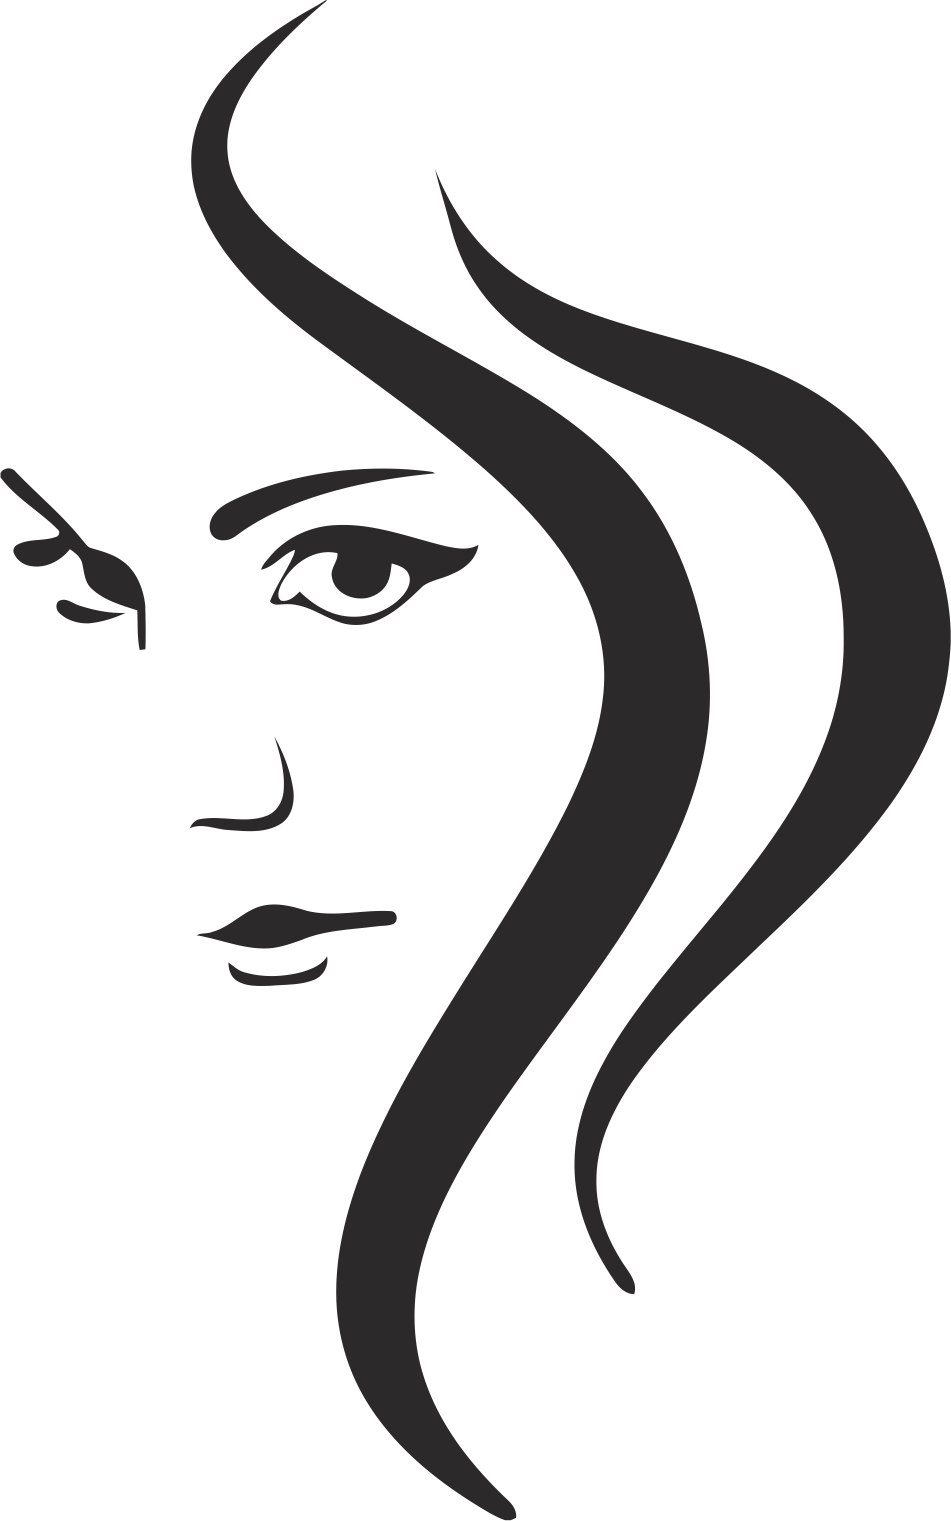 Woman Silhouette Vector Art, Icons, and Graphics for Free Download